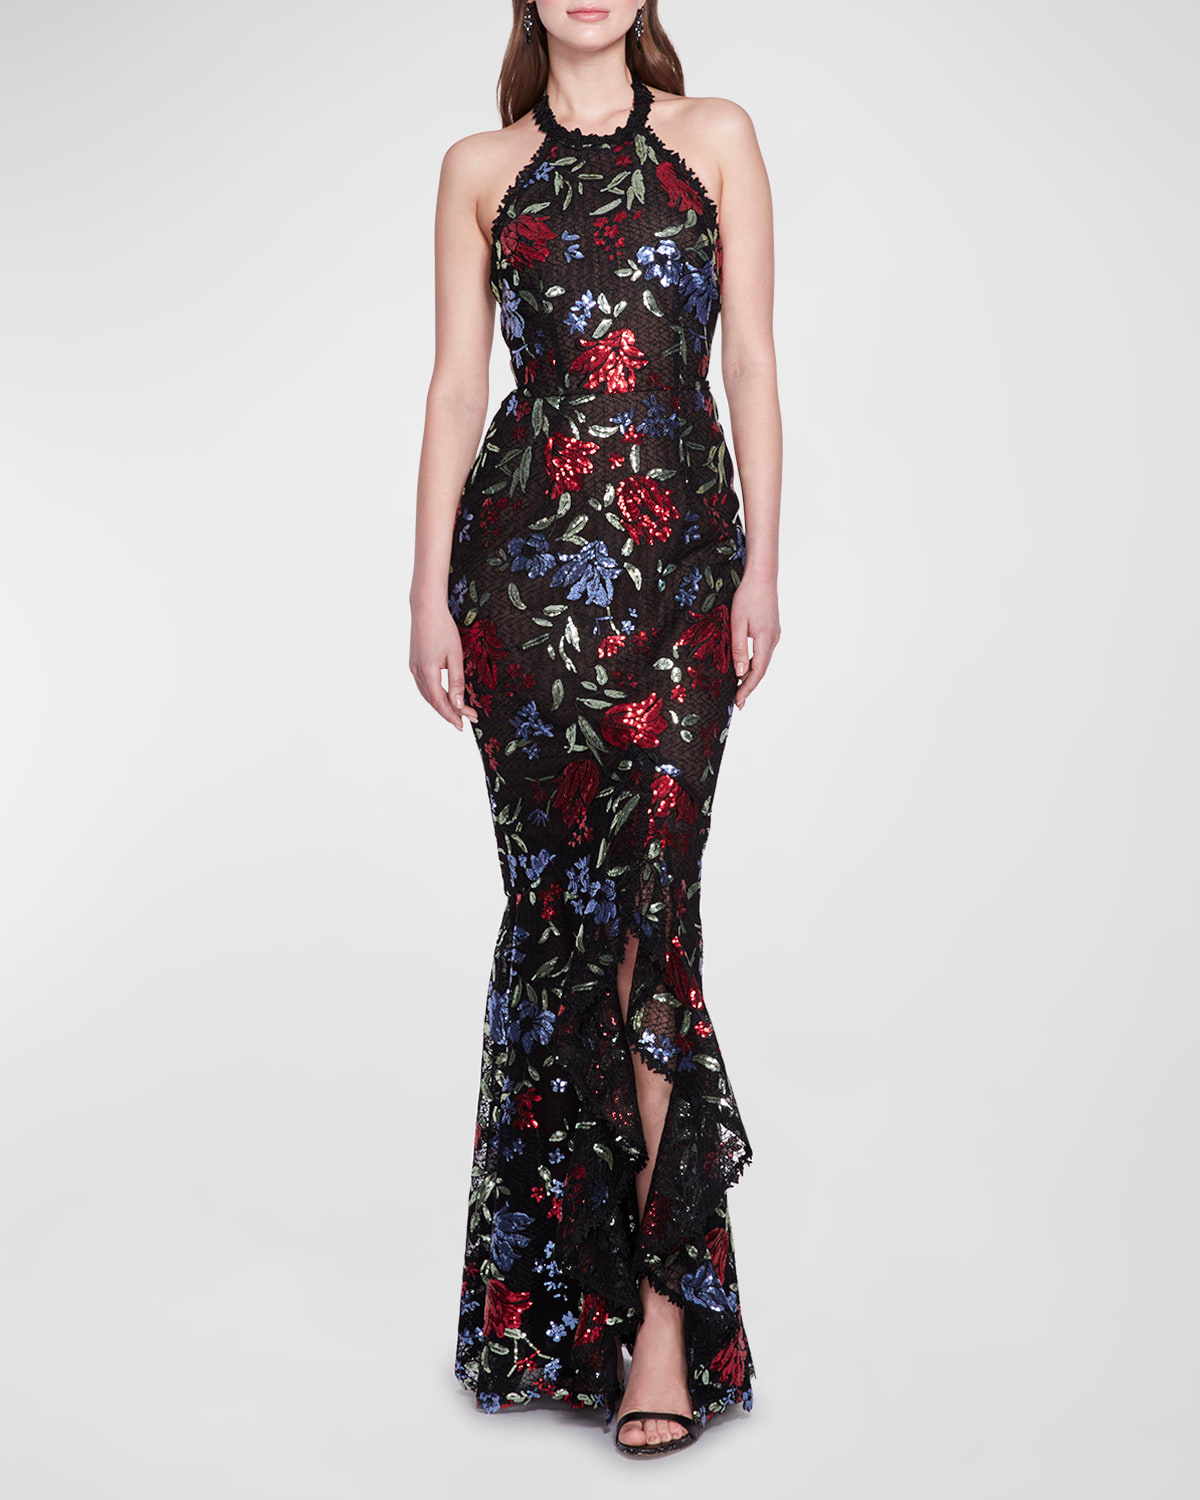 MARCHESA NOTTE HIGH-LOW FLORAL SEQUIN MERMAID GOWN